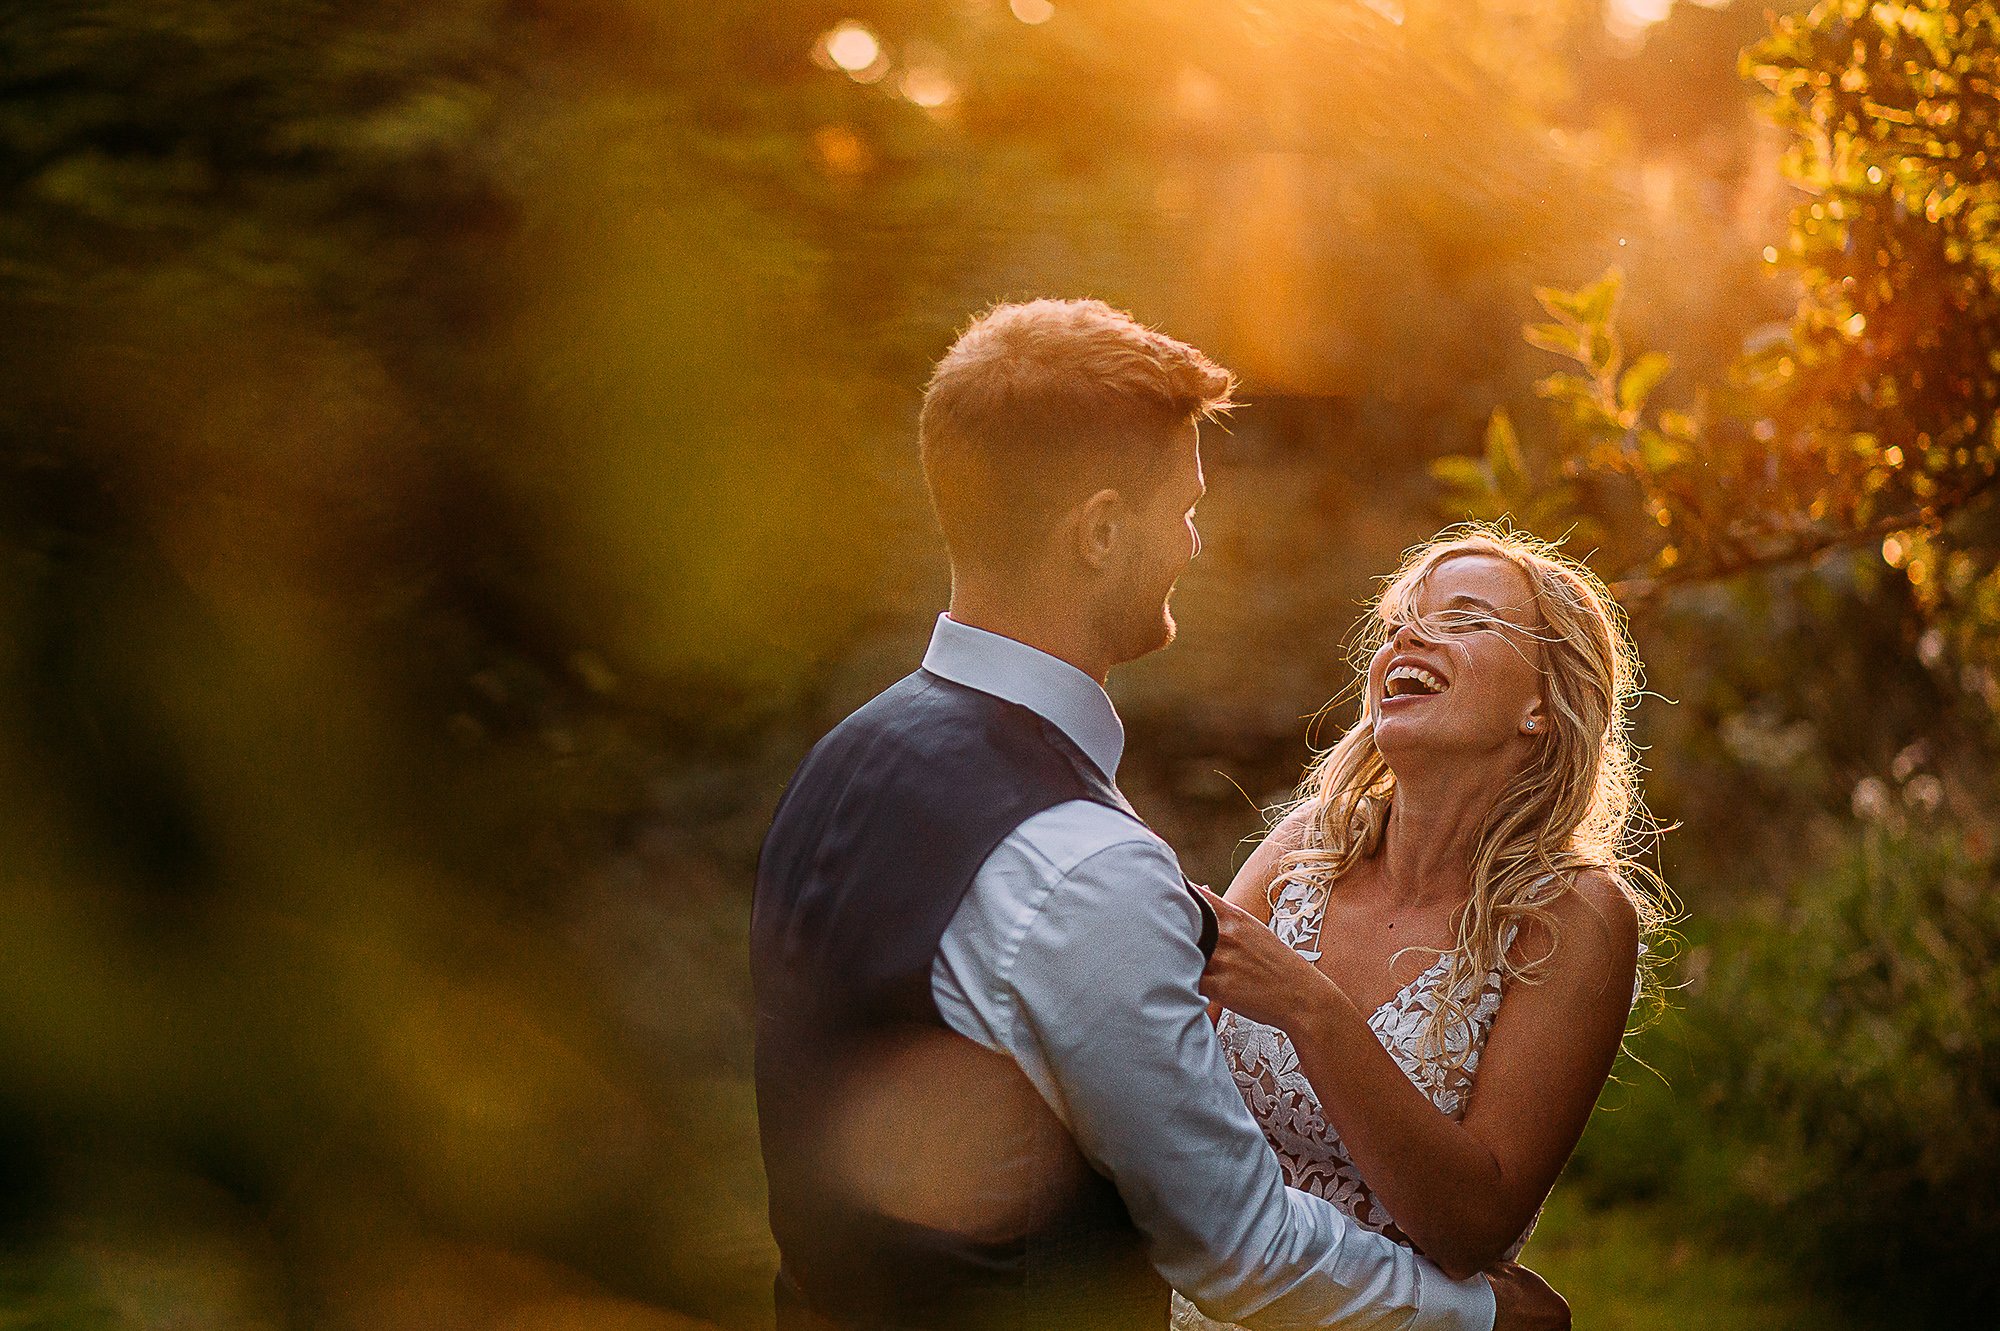  Couple portrait with the bride laughing during sun set. 